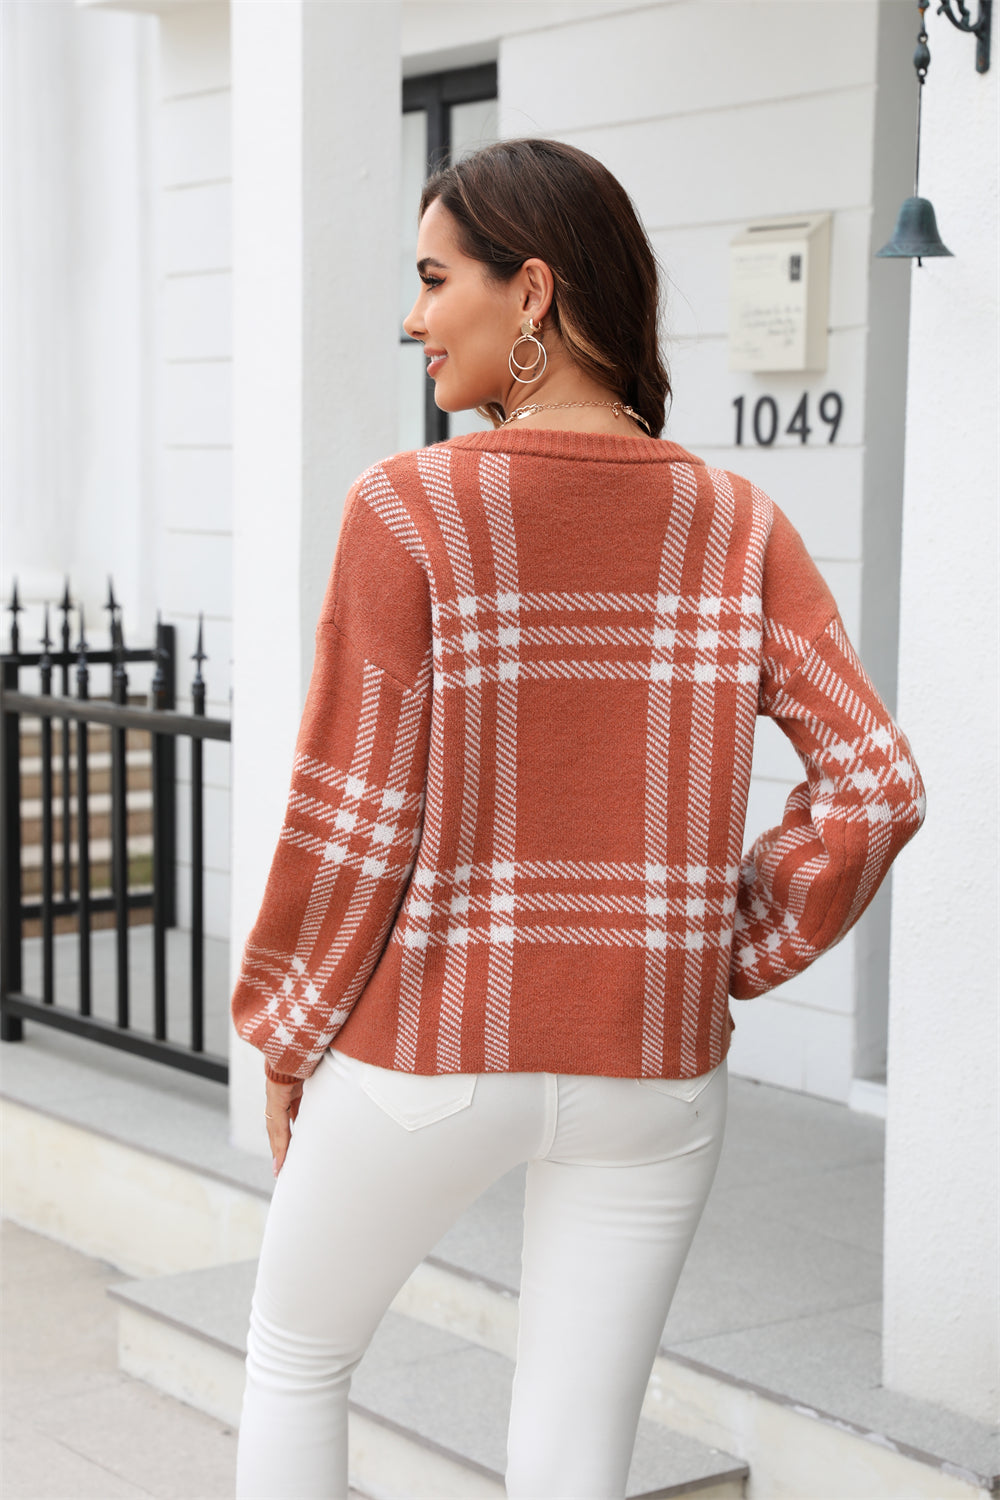 Autumn Winter Women Sweater Large Plaid Stitching Casual Pullover Round Neck Sweater